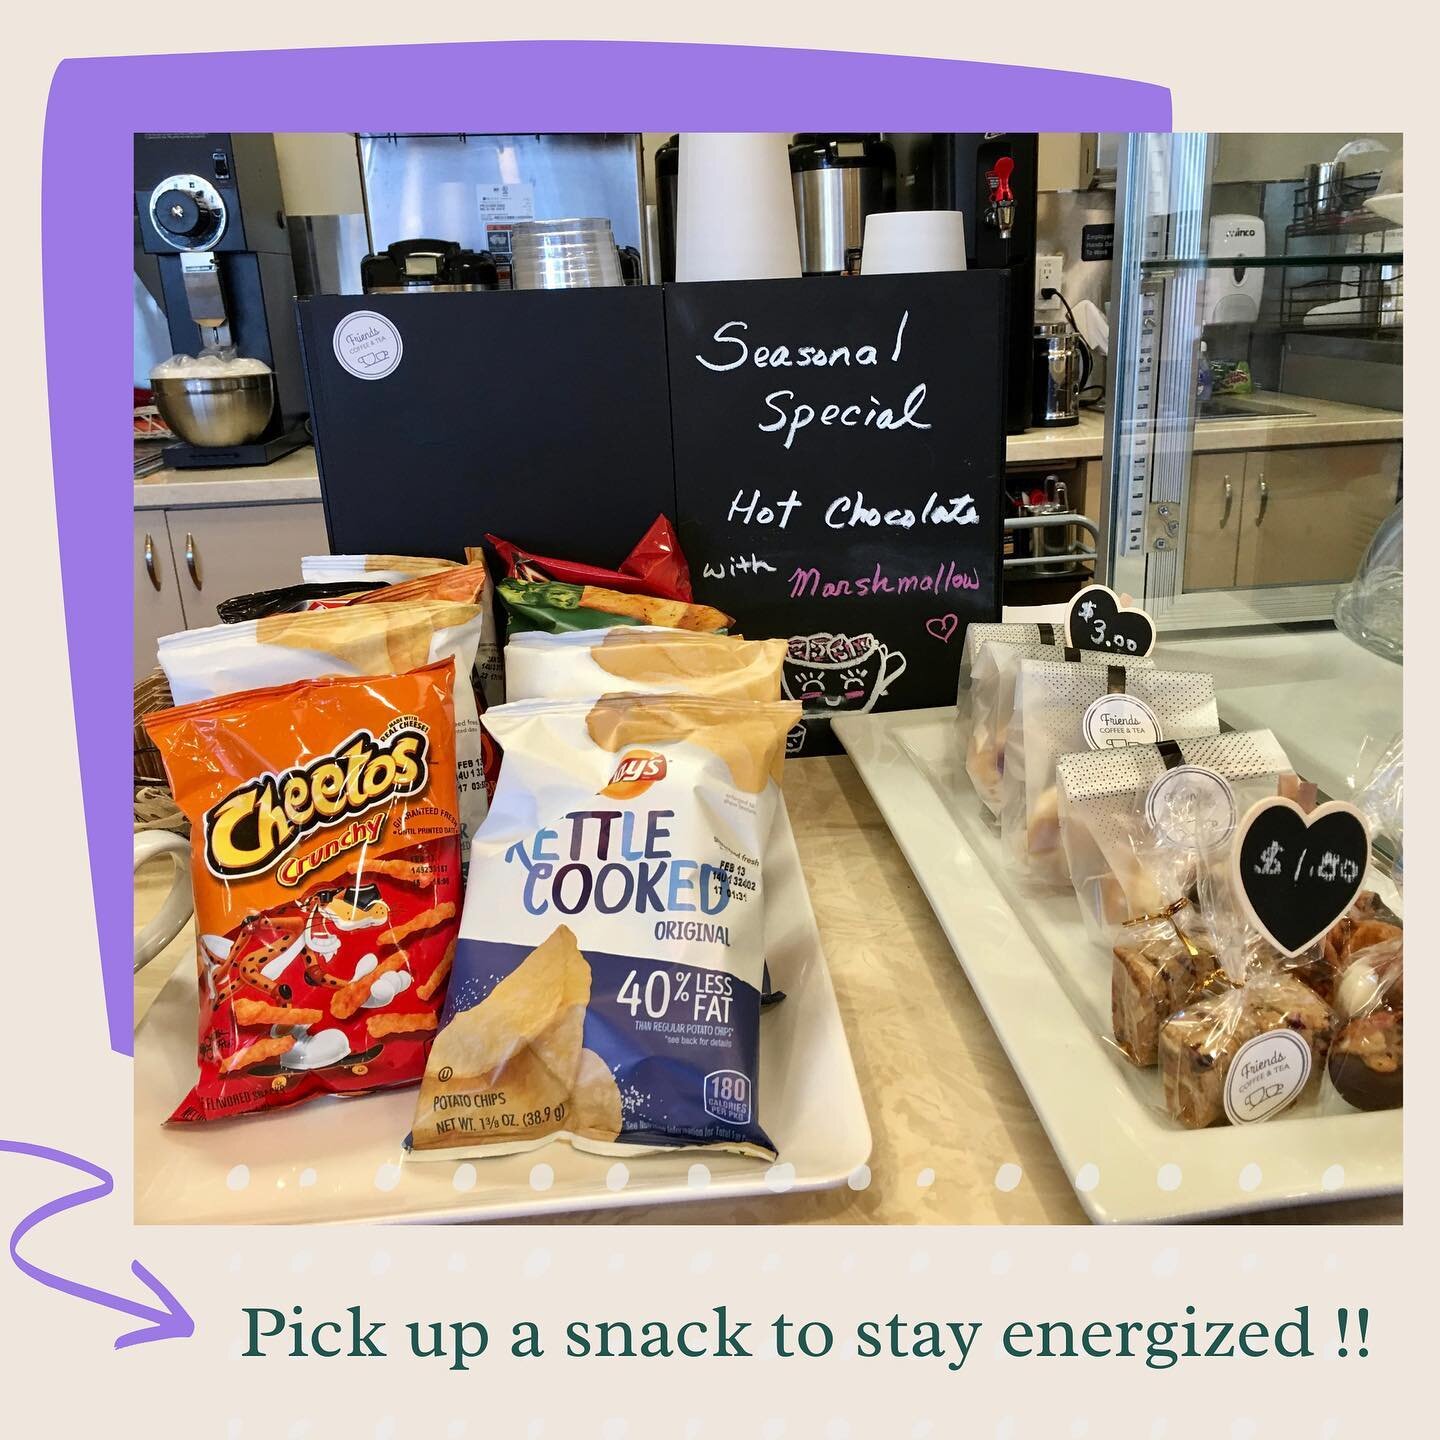 Other than regualr pastries and beverage, we also have one array of different chip bags &amp; snack bags. Next time, dont forget to check our snack basket when you visit us. 

#thursday #snacks #chips #snackbags #snacktime #snack #eats #eat #energize